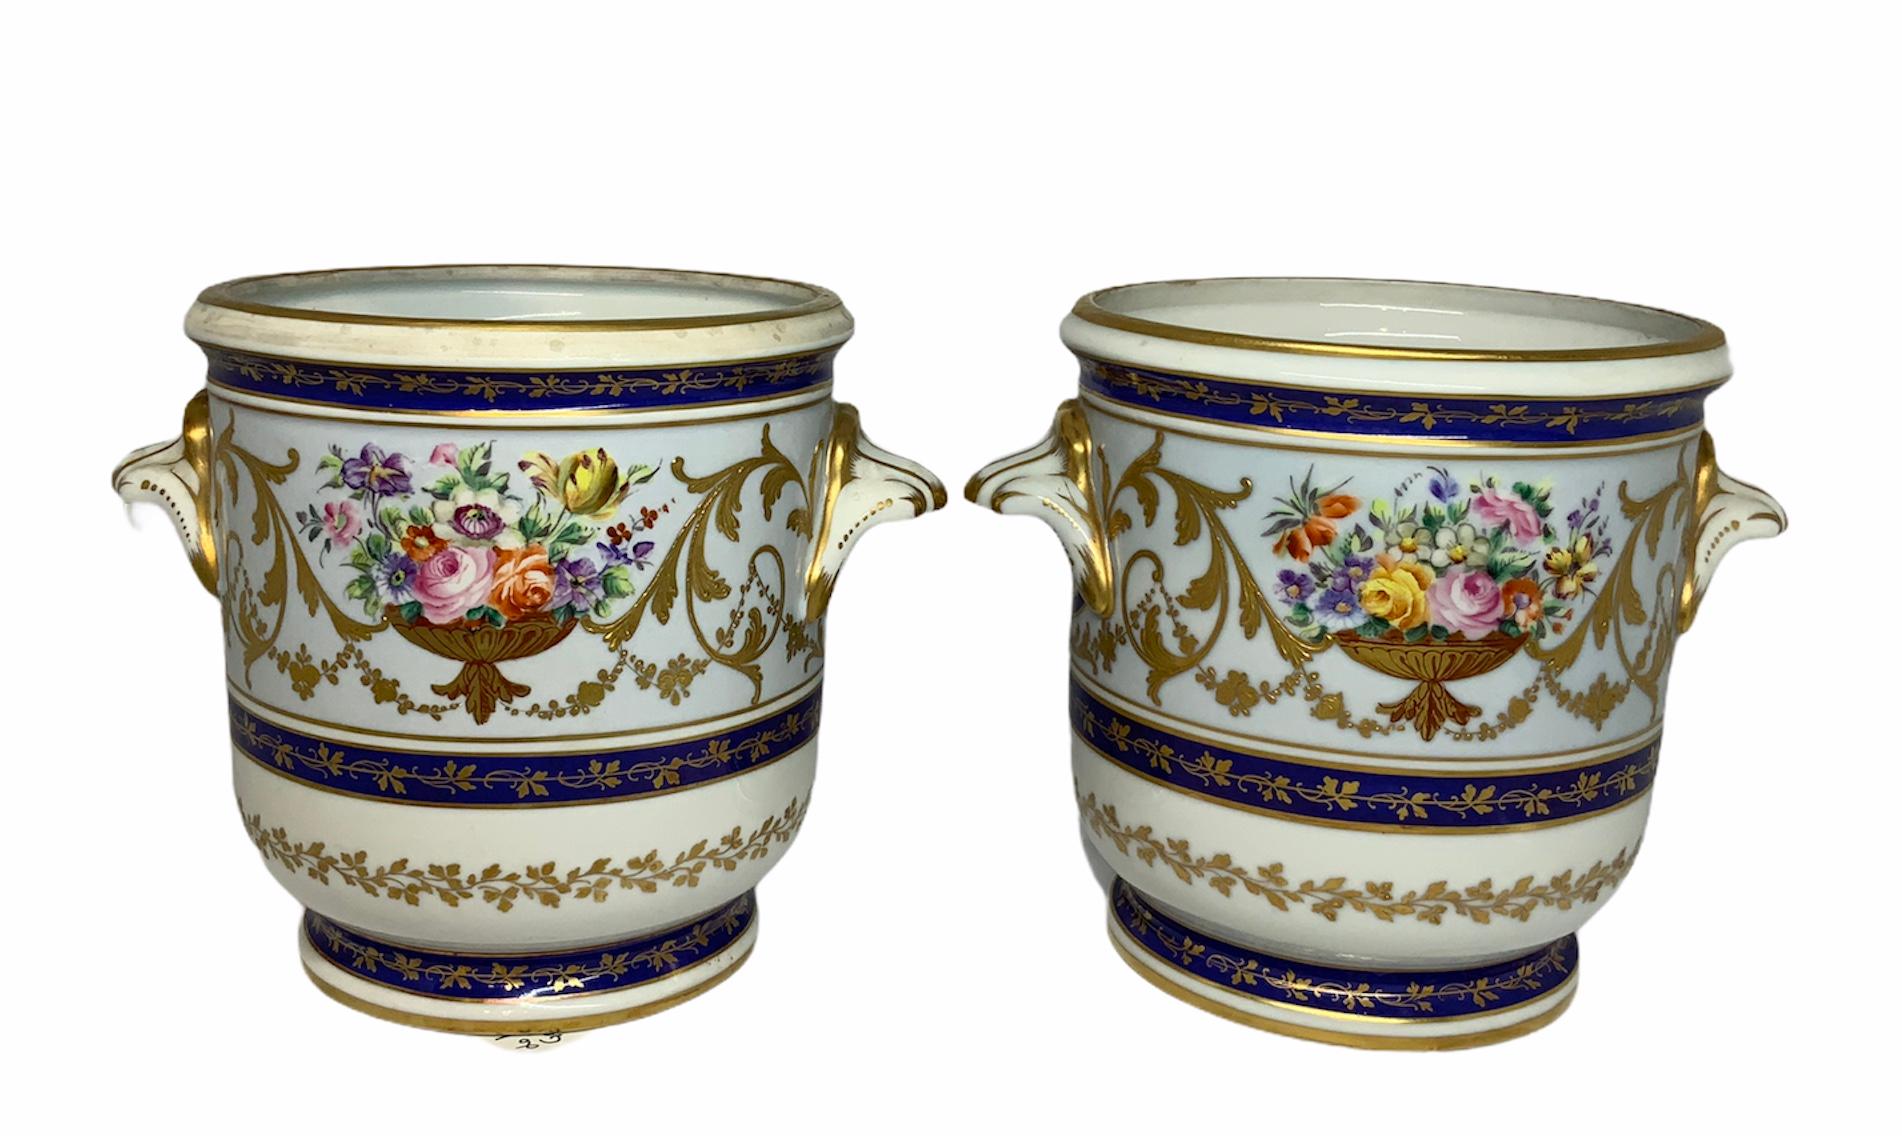 Hand-Painted Camille Le Tallec Porcelain Pair of Cachepot For Sale